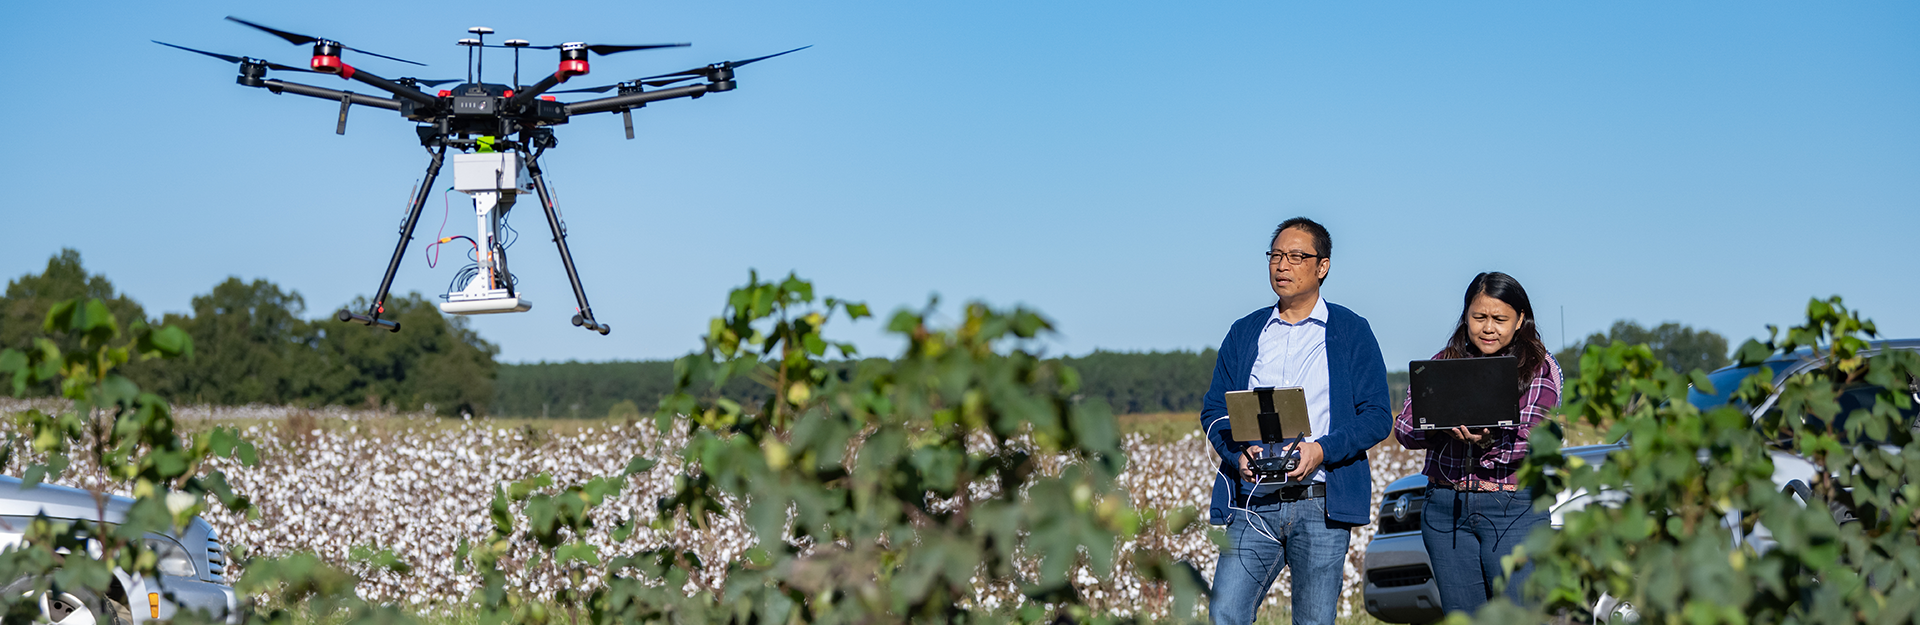 Researchers in cotton field flying a drone